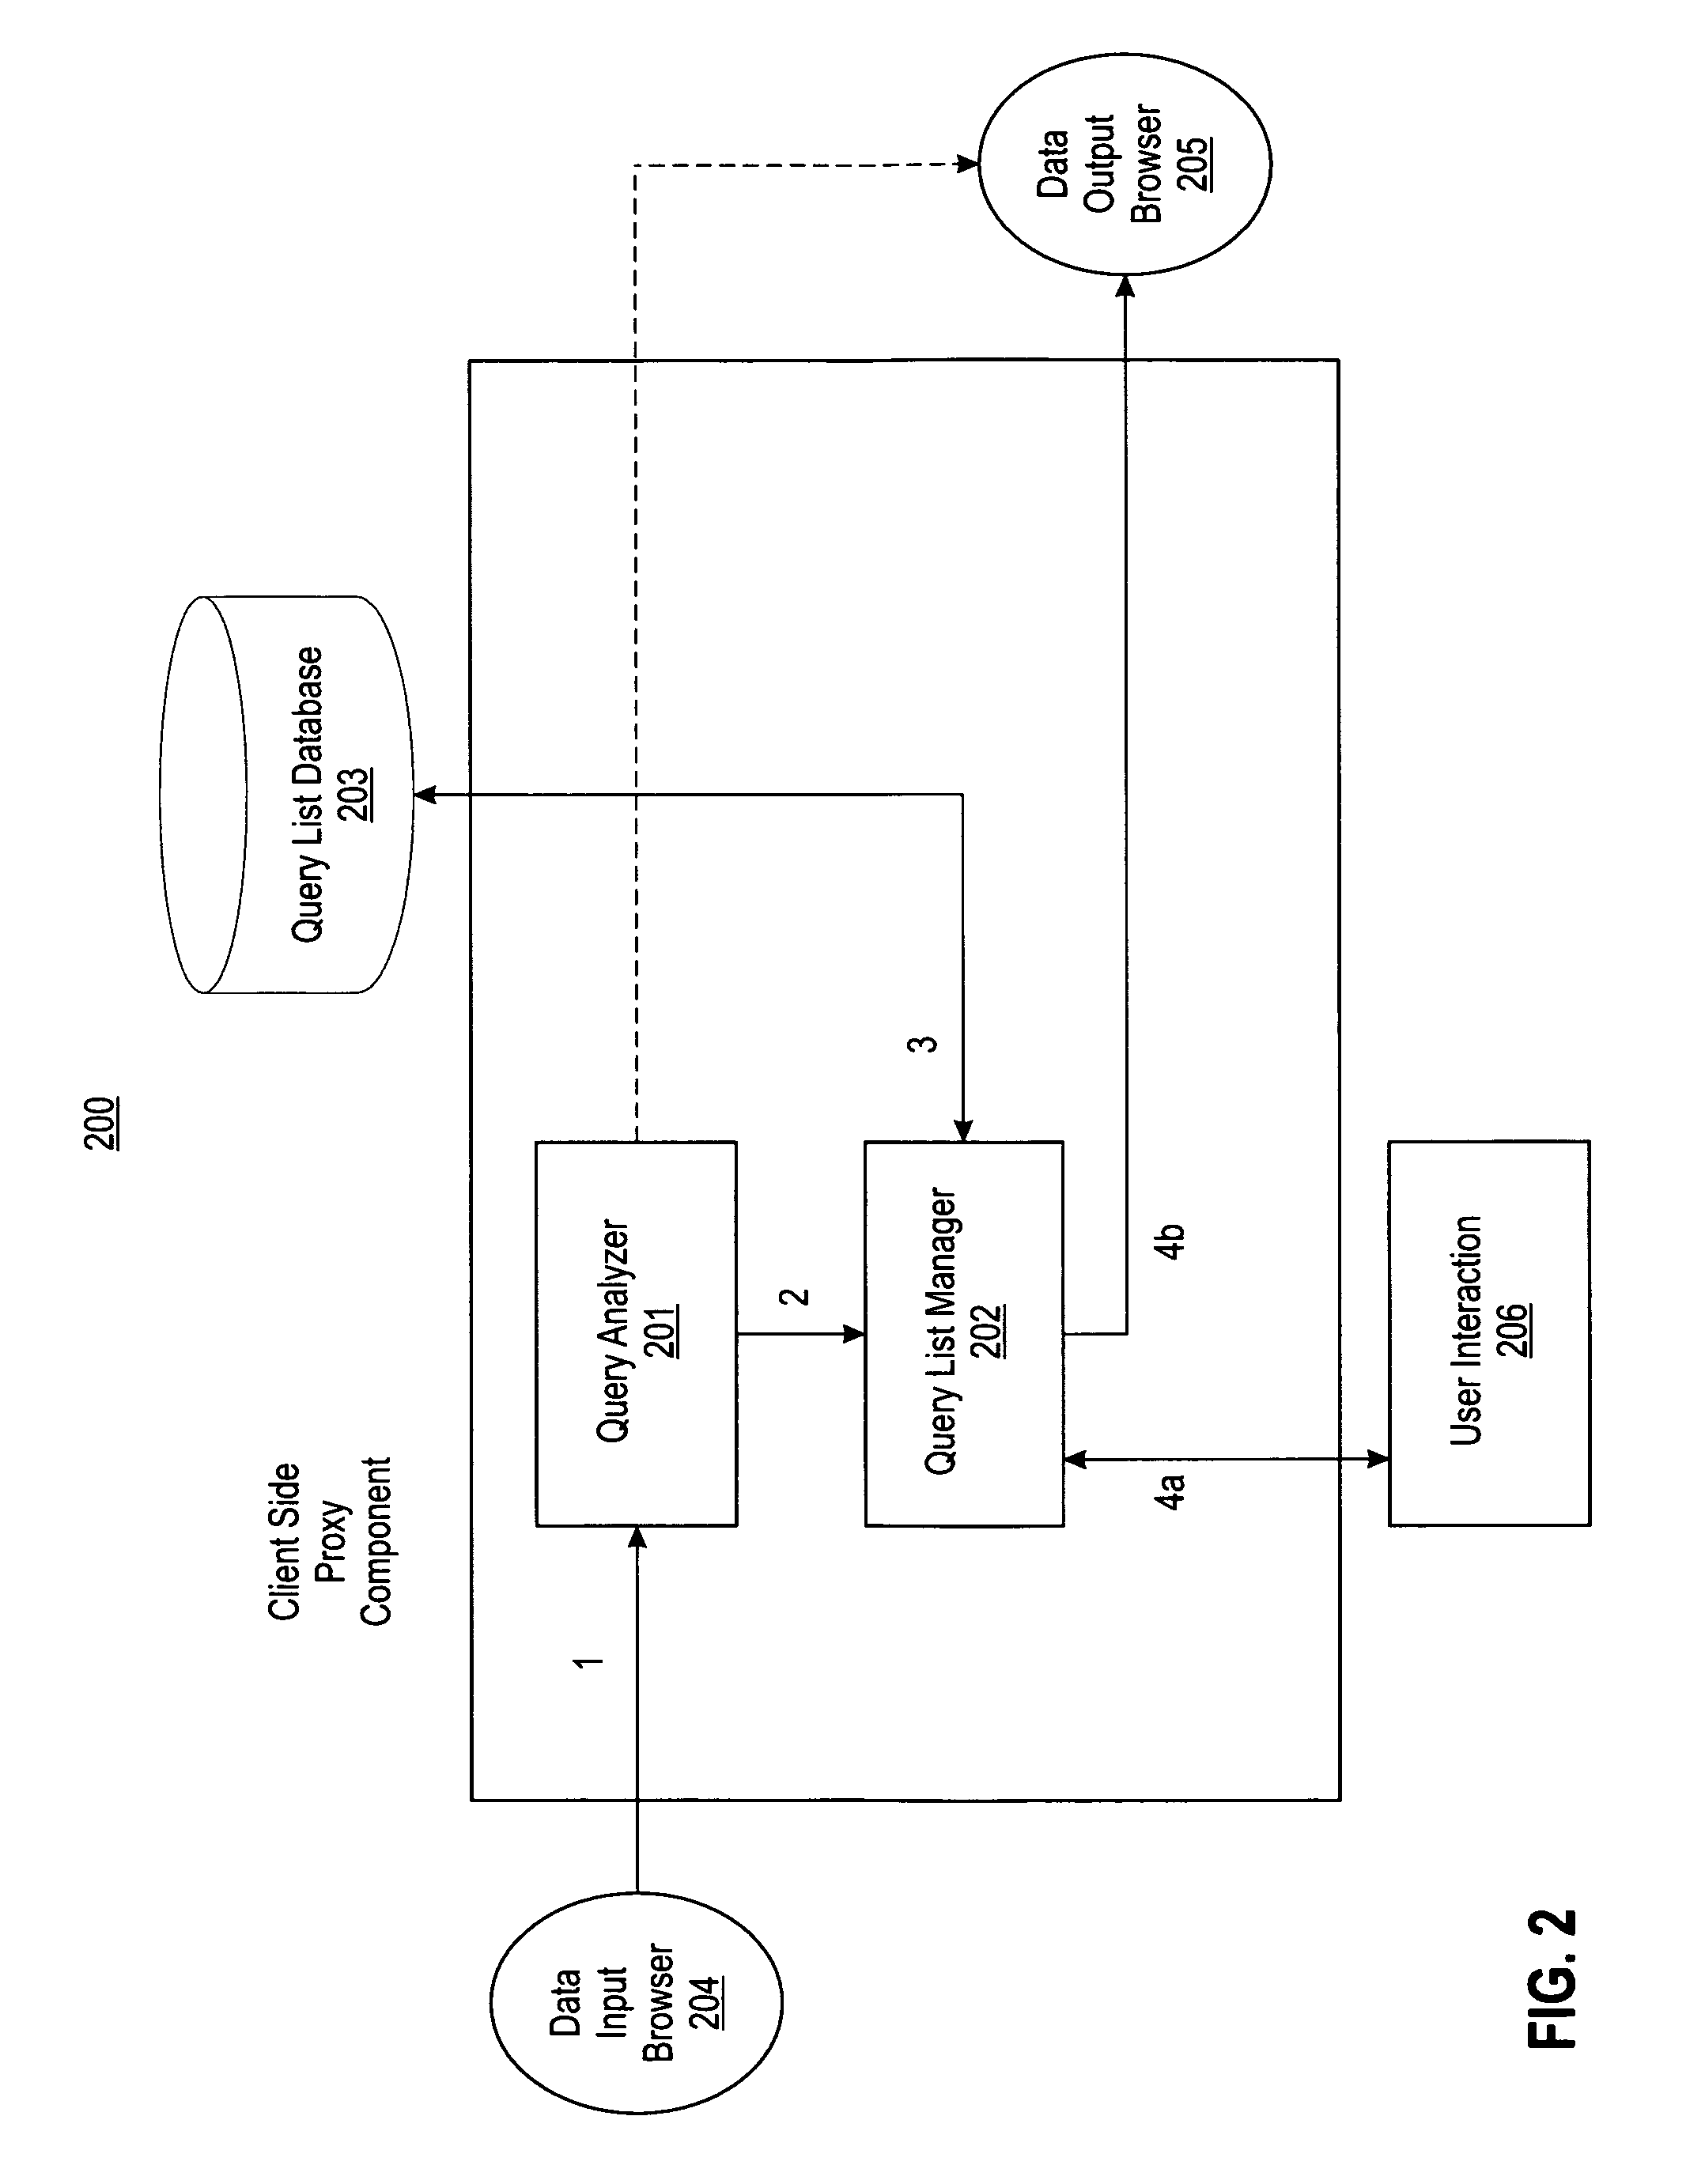 System and method for web based sharing of search engine queries